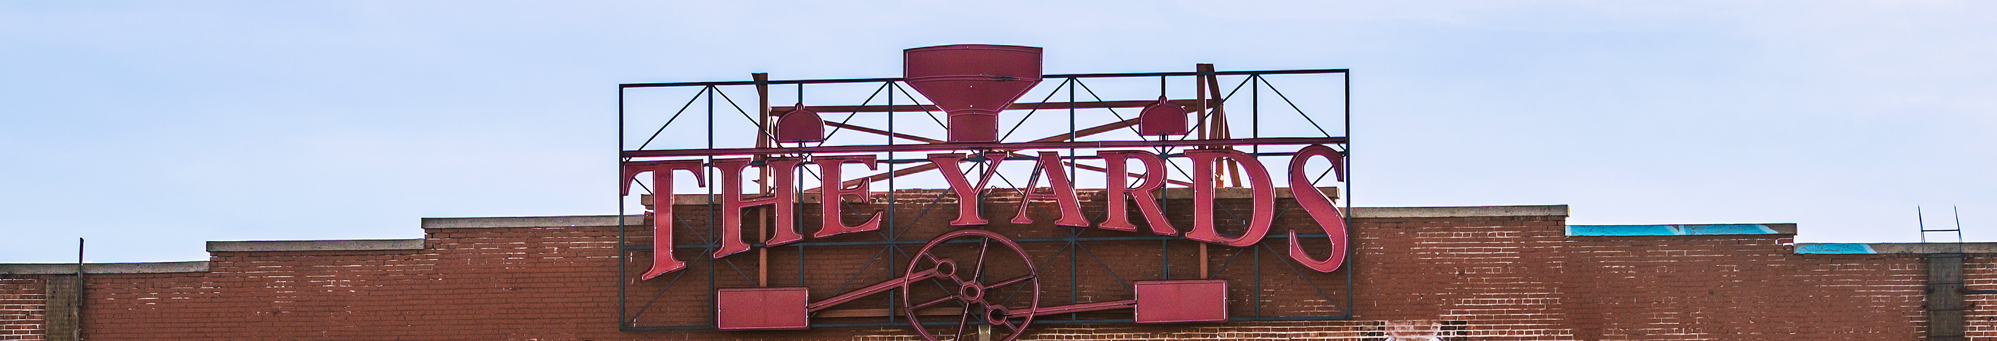 The Yards Neon - Banner Image